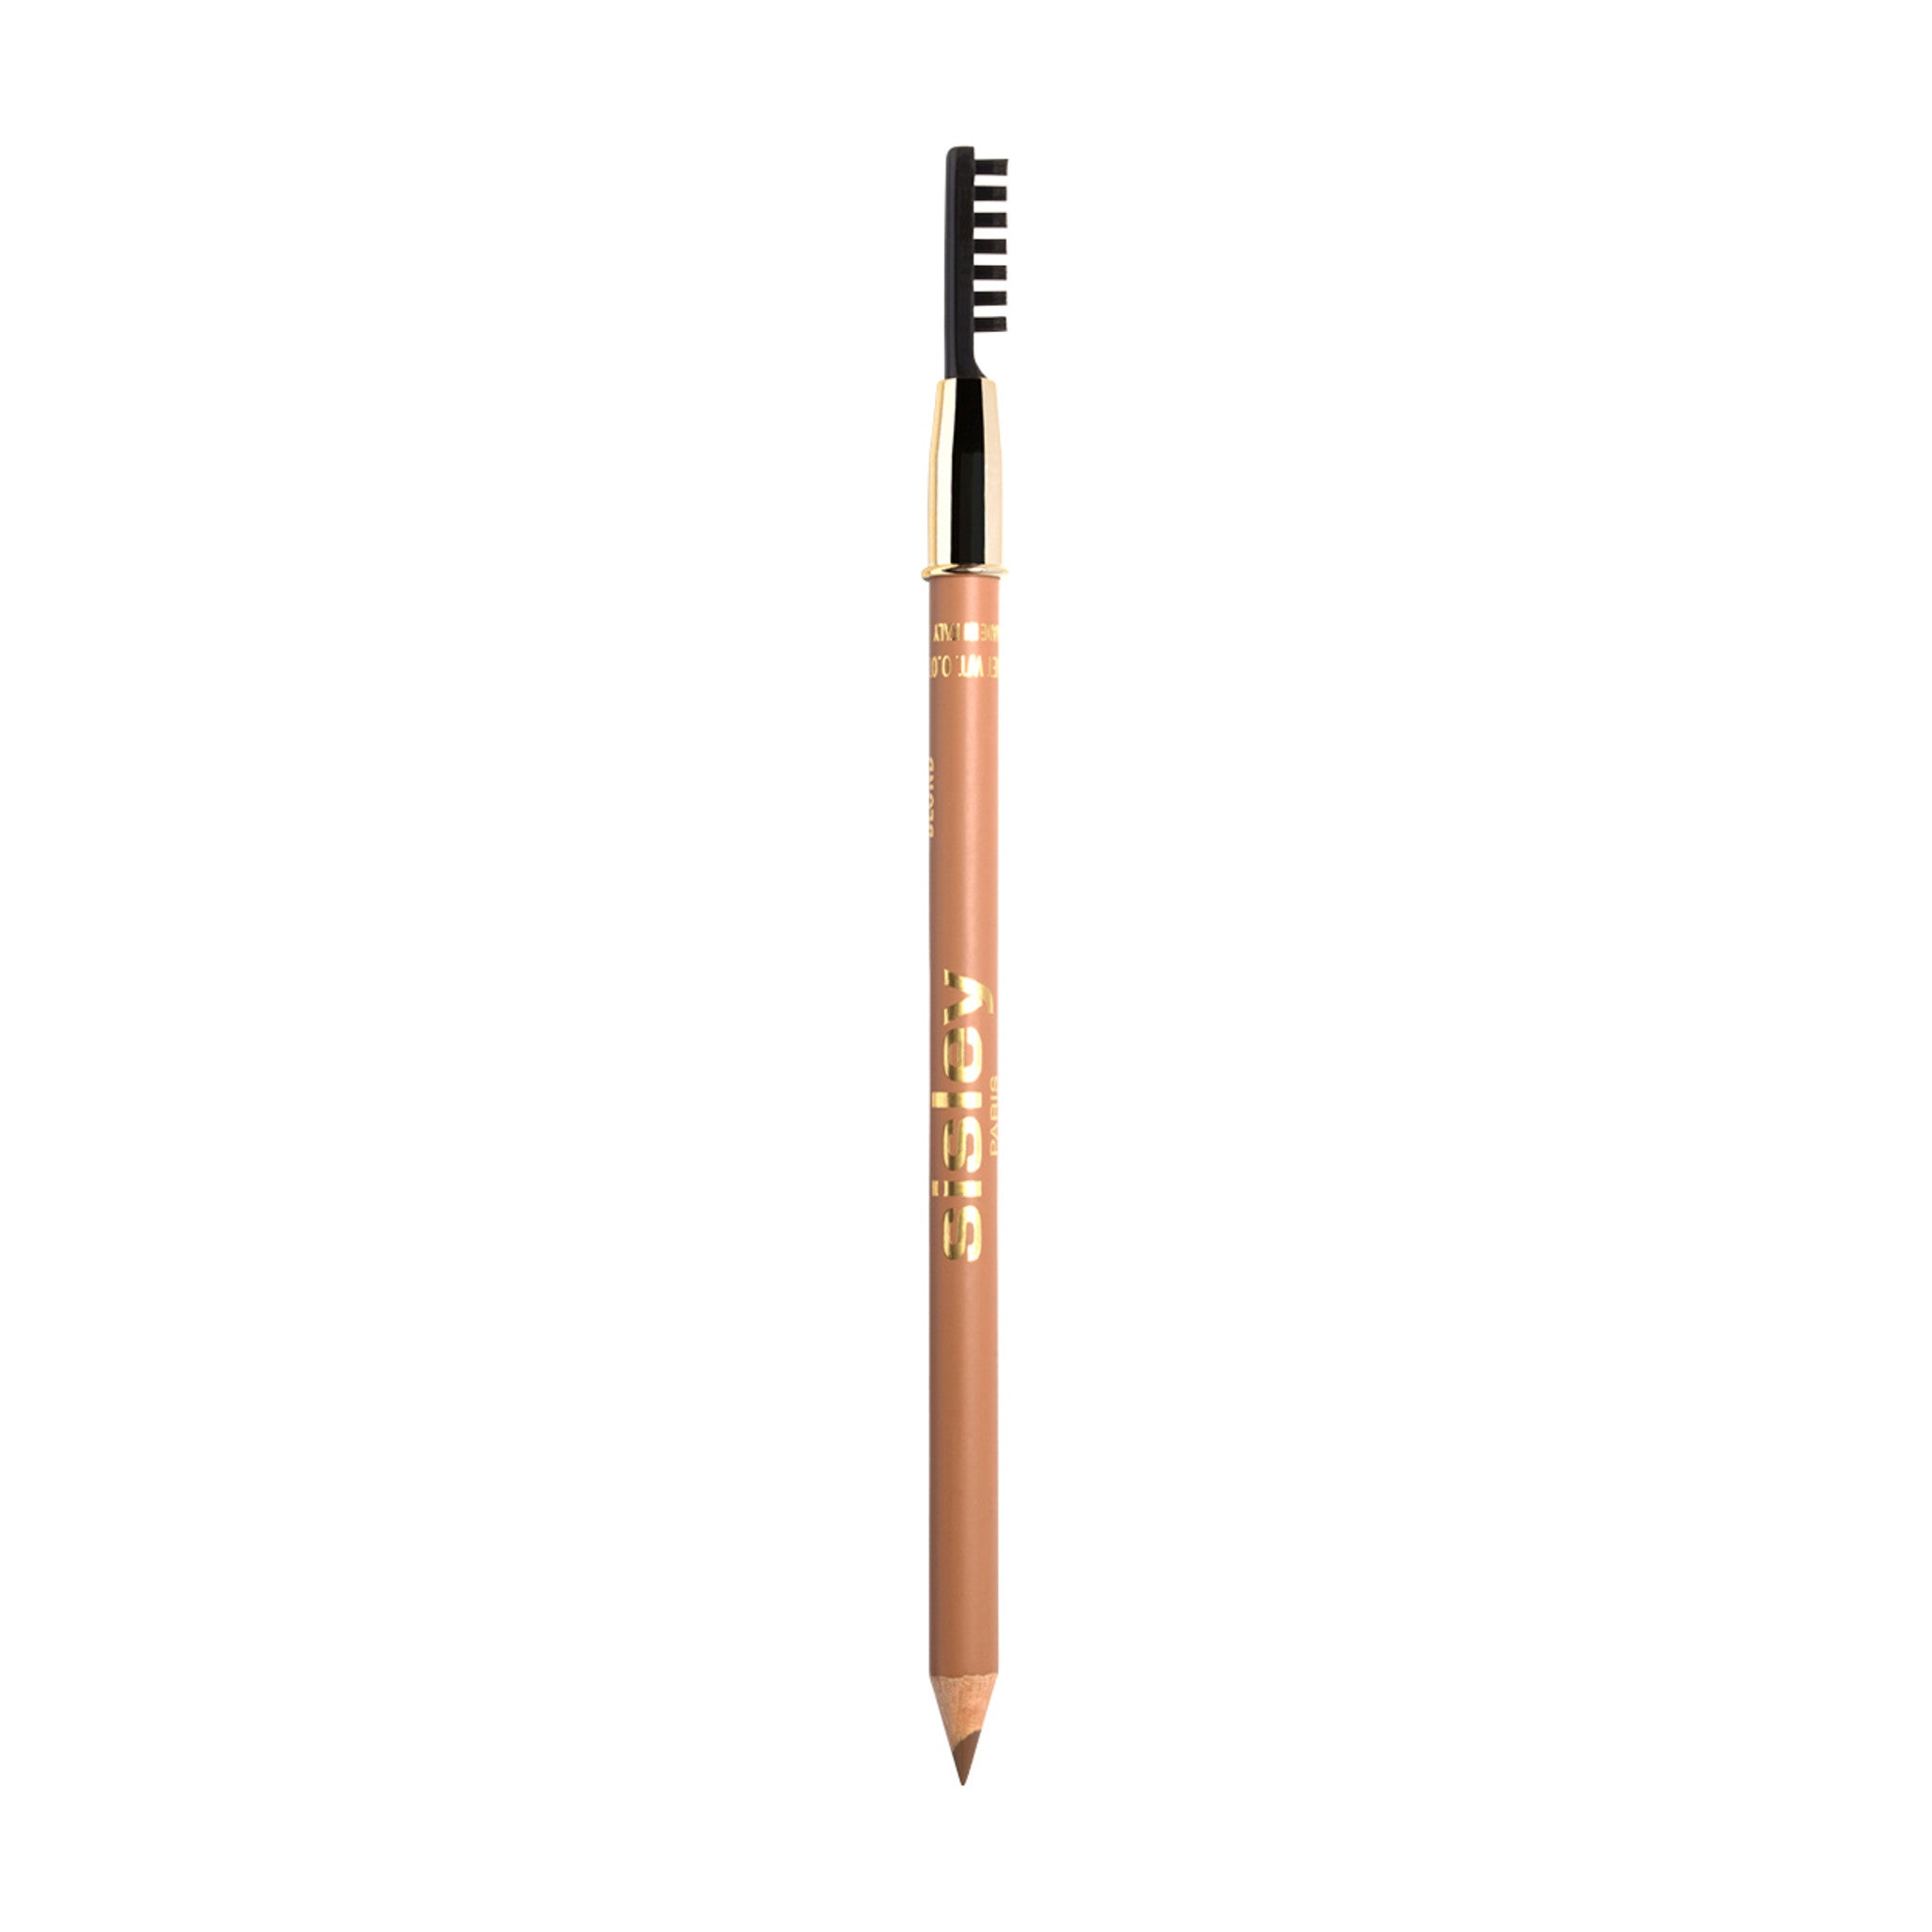 Sisley-Paris Phyto-Sourcils Perfect Eyebrow Pencil Color/Shade variant: Blond main image. This product is in the color brown